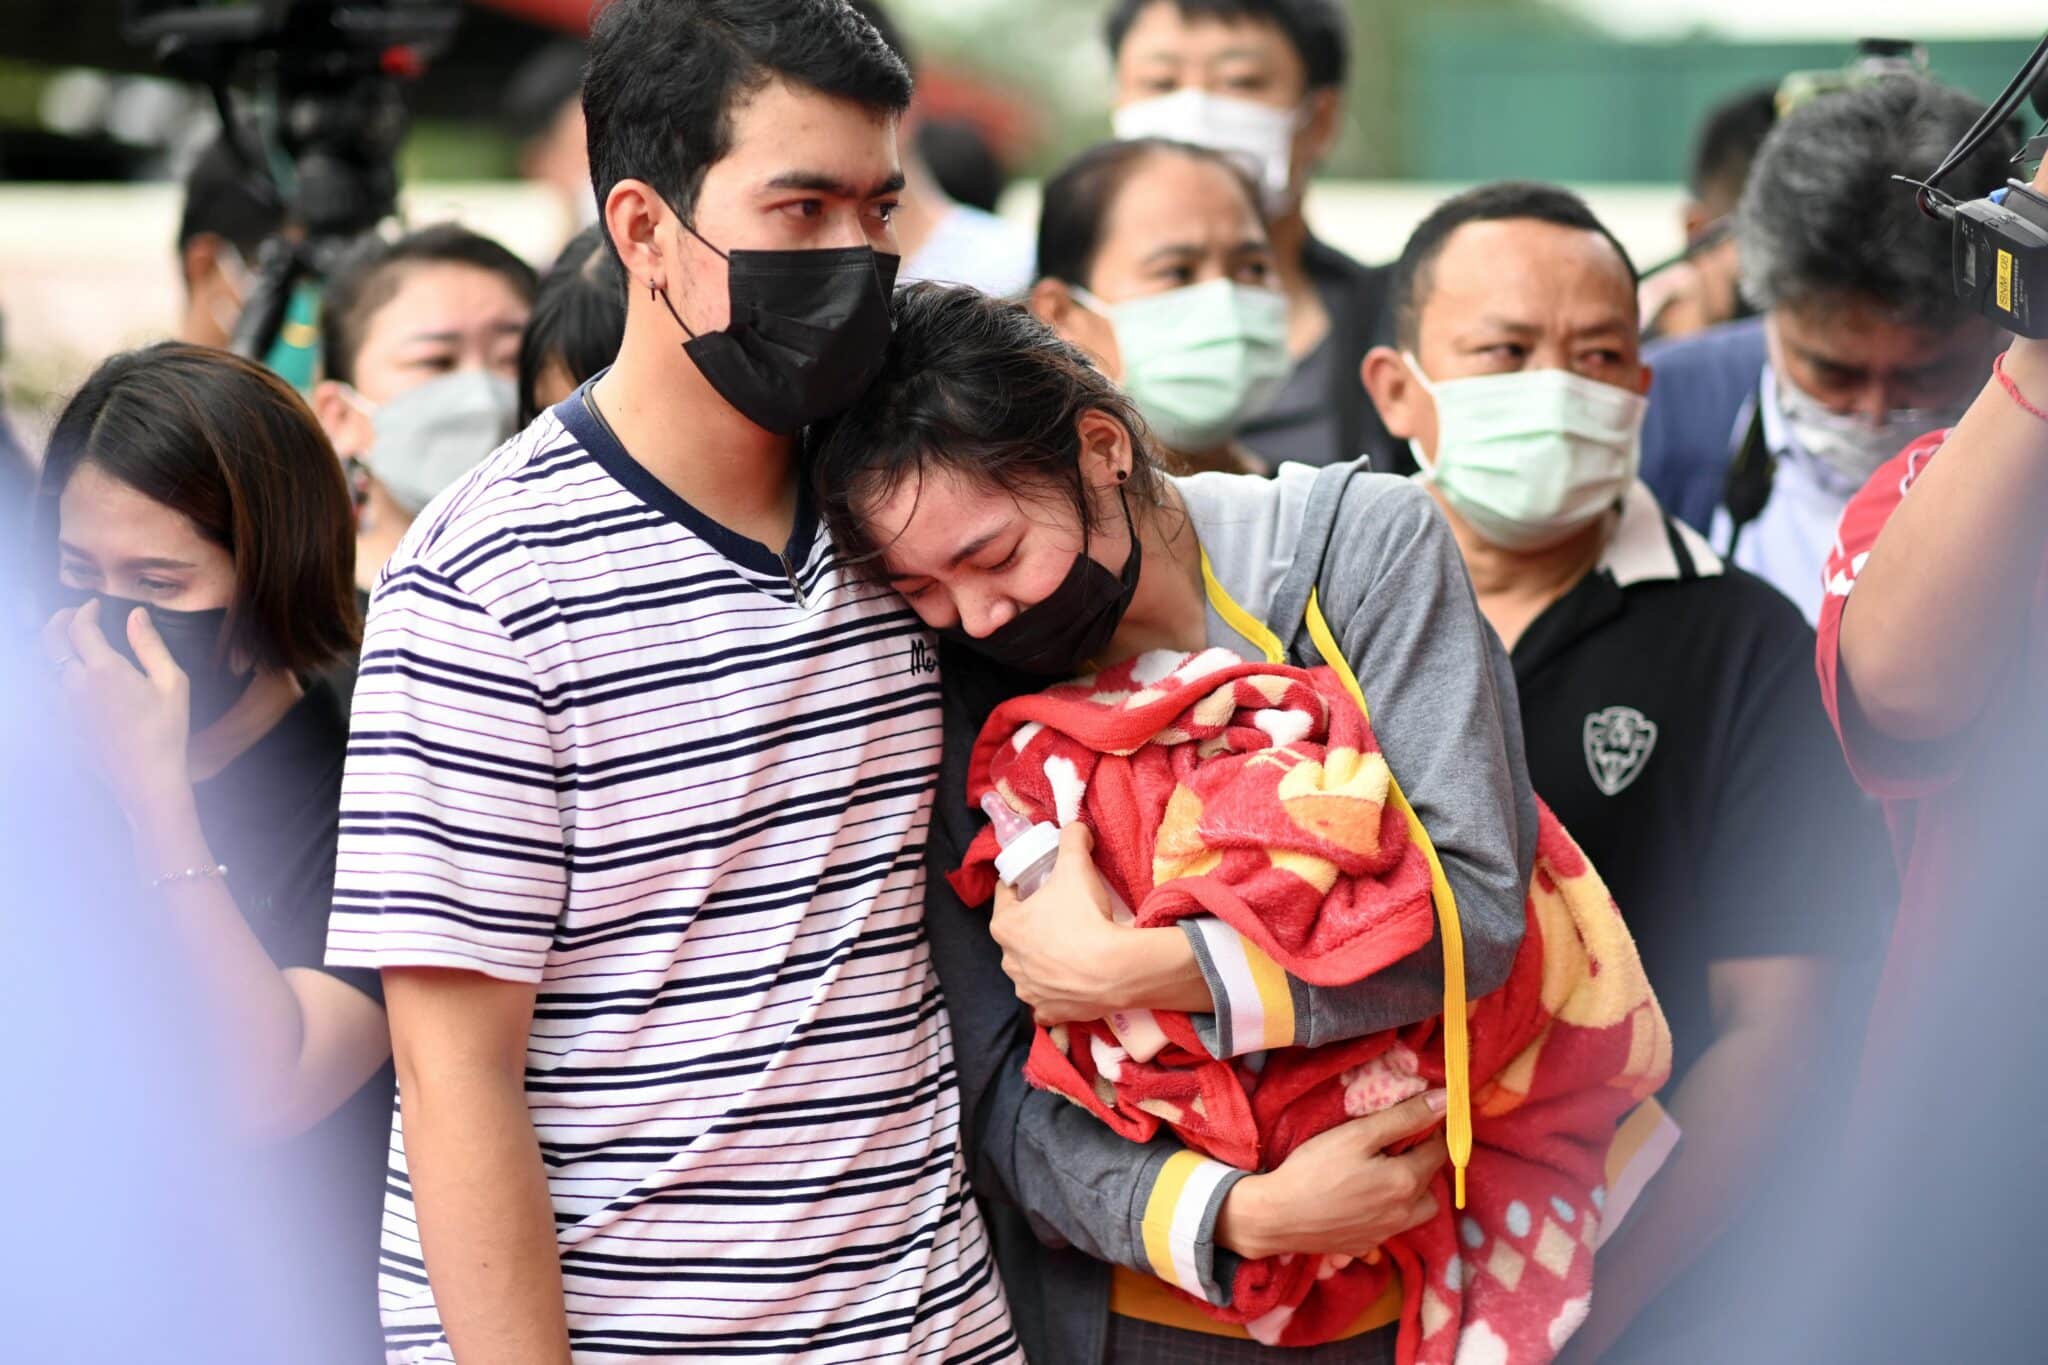 The mother of a victim holds a milk bottle and blanket as she reacts while standing outside the nursery in Na Klang in Thailand's northeastern Nong Bua Lam Phu province on October 7, 2022, the day after a former police officer killed at least 37 people in a mass shooting at the site. - Weeping, grief-stricken families gathered on October 7 outside a Thai nursery where an ex-policeman murdered nearly two dozen children in one of the kingdom's worst mass killings. (Photo by Manan VATSYAYANA / AFP) (Photo by MANAN VATSYAYANA/AFP via Getty Images)